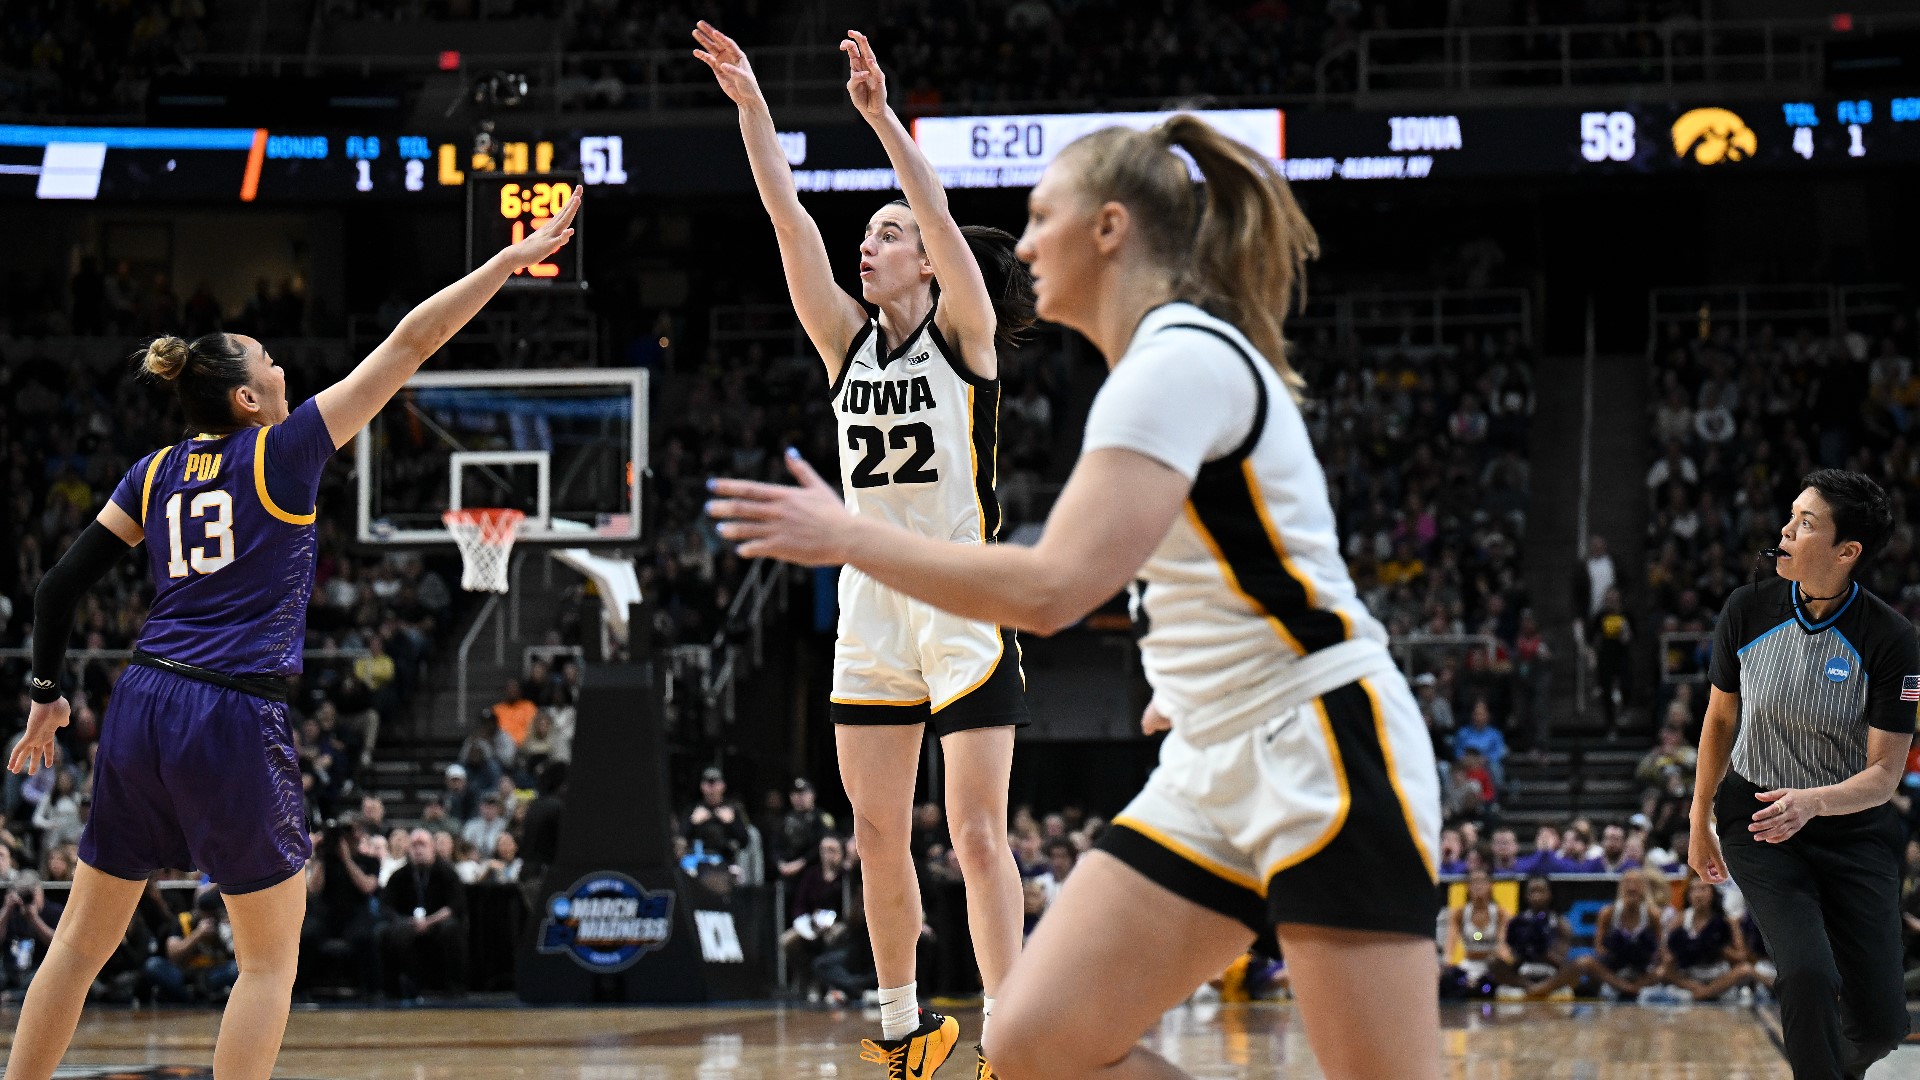 The Hawkeyes will face UConn on Firday night.